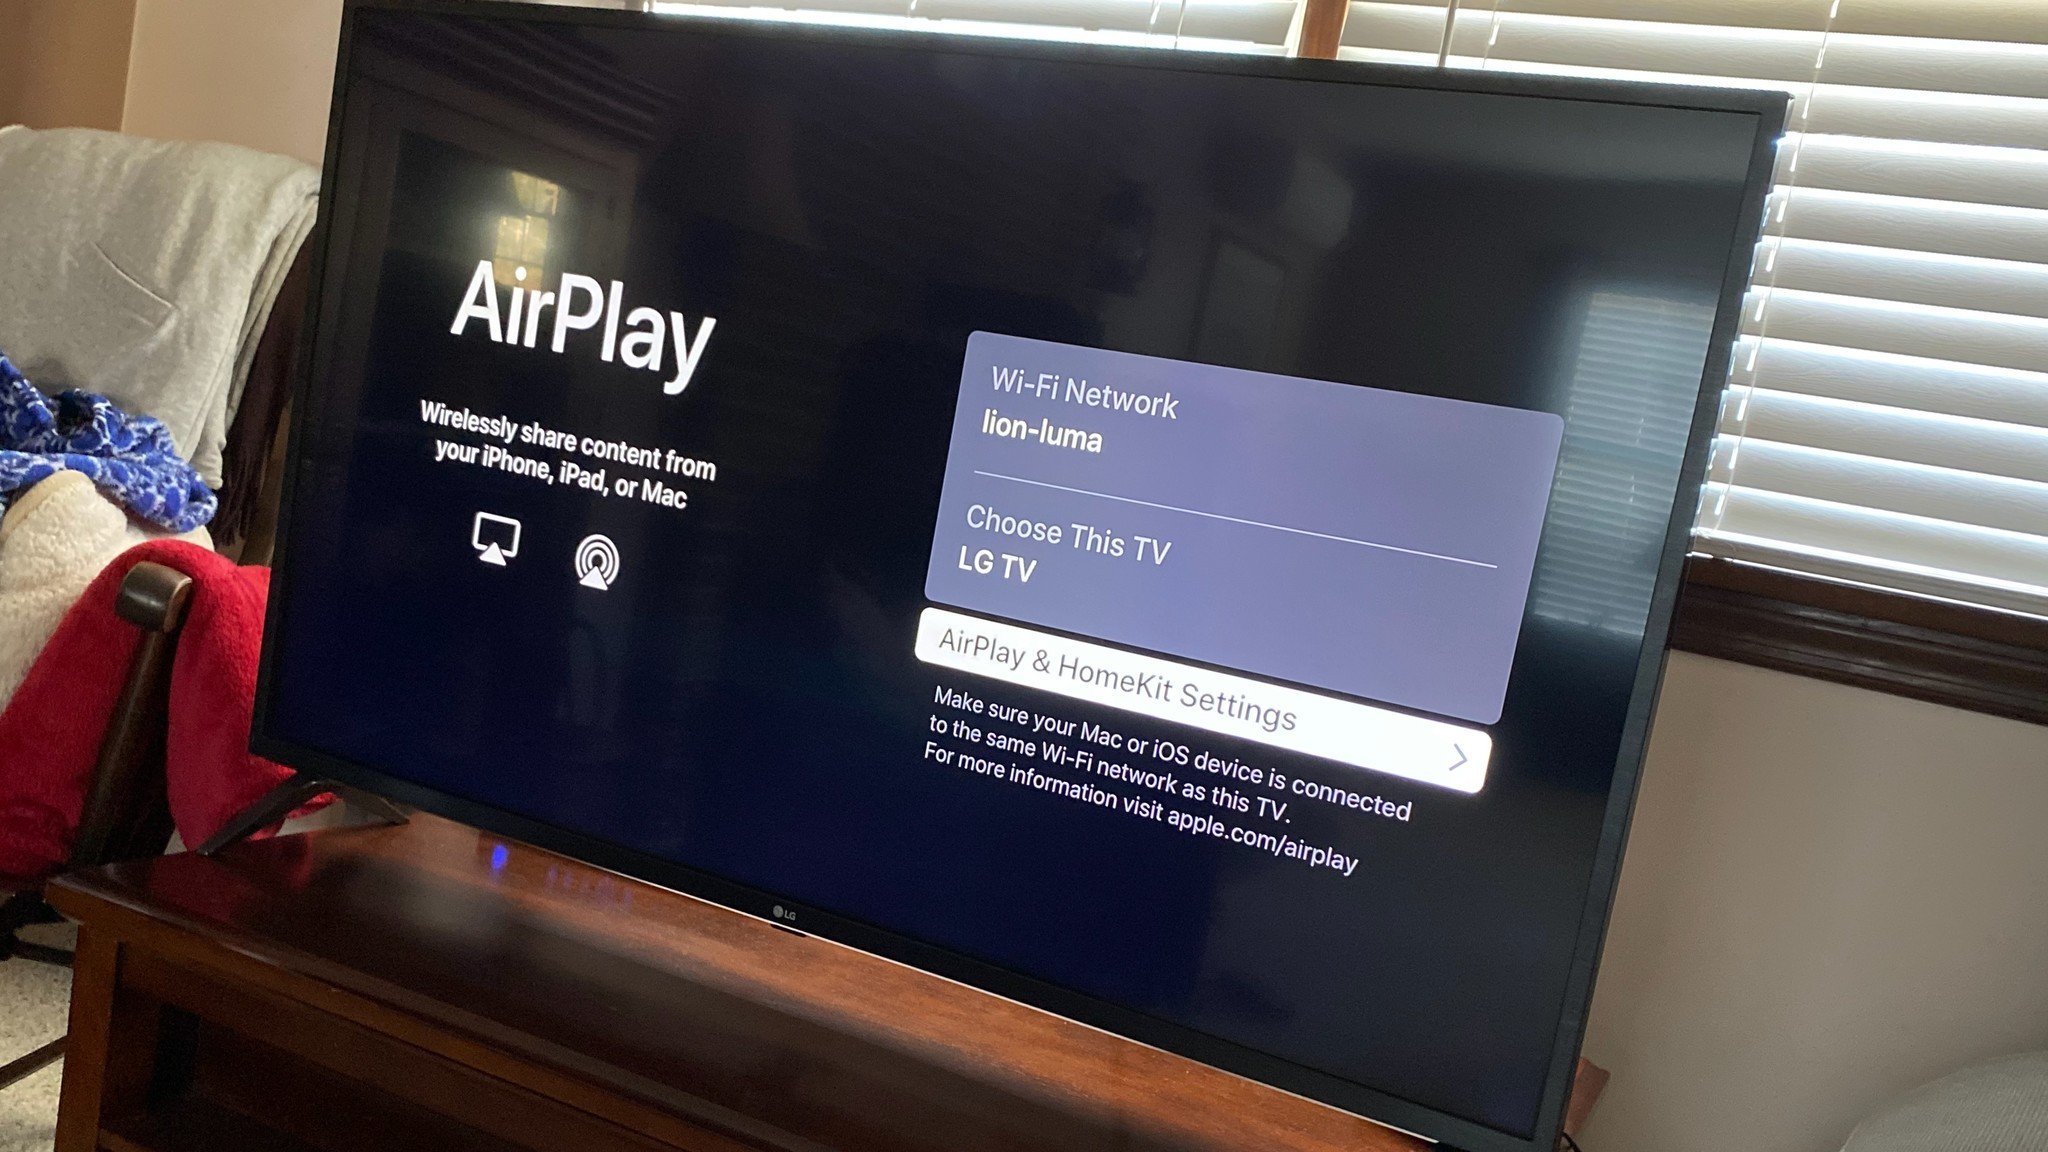 Airplay 2 And Hot For Smart Tvs, How Do I Mirror My Ipad Onto Samsung Smart Tv